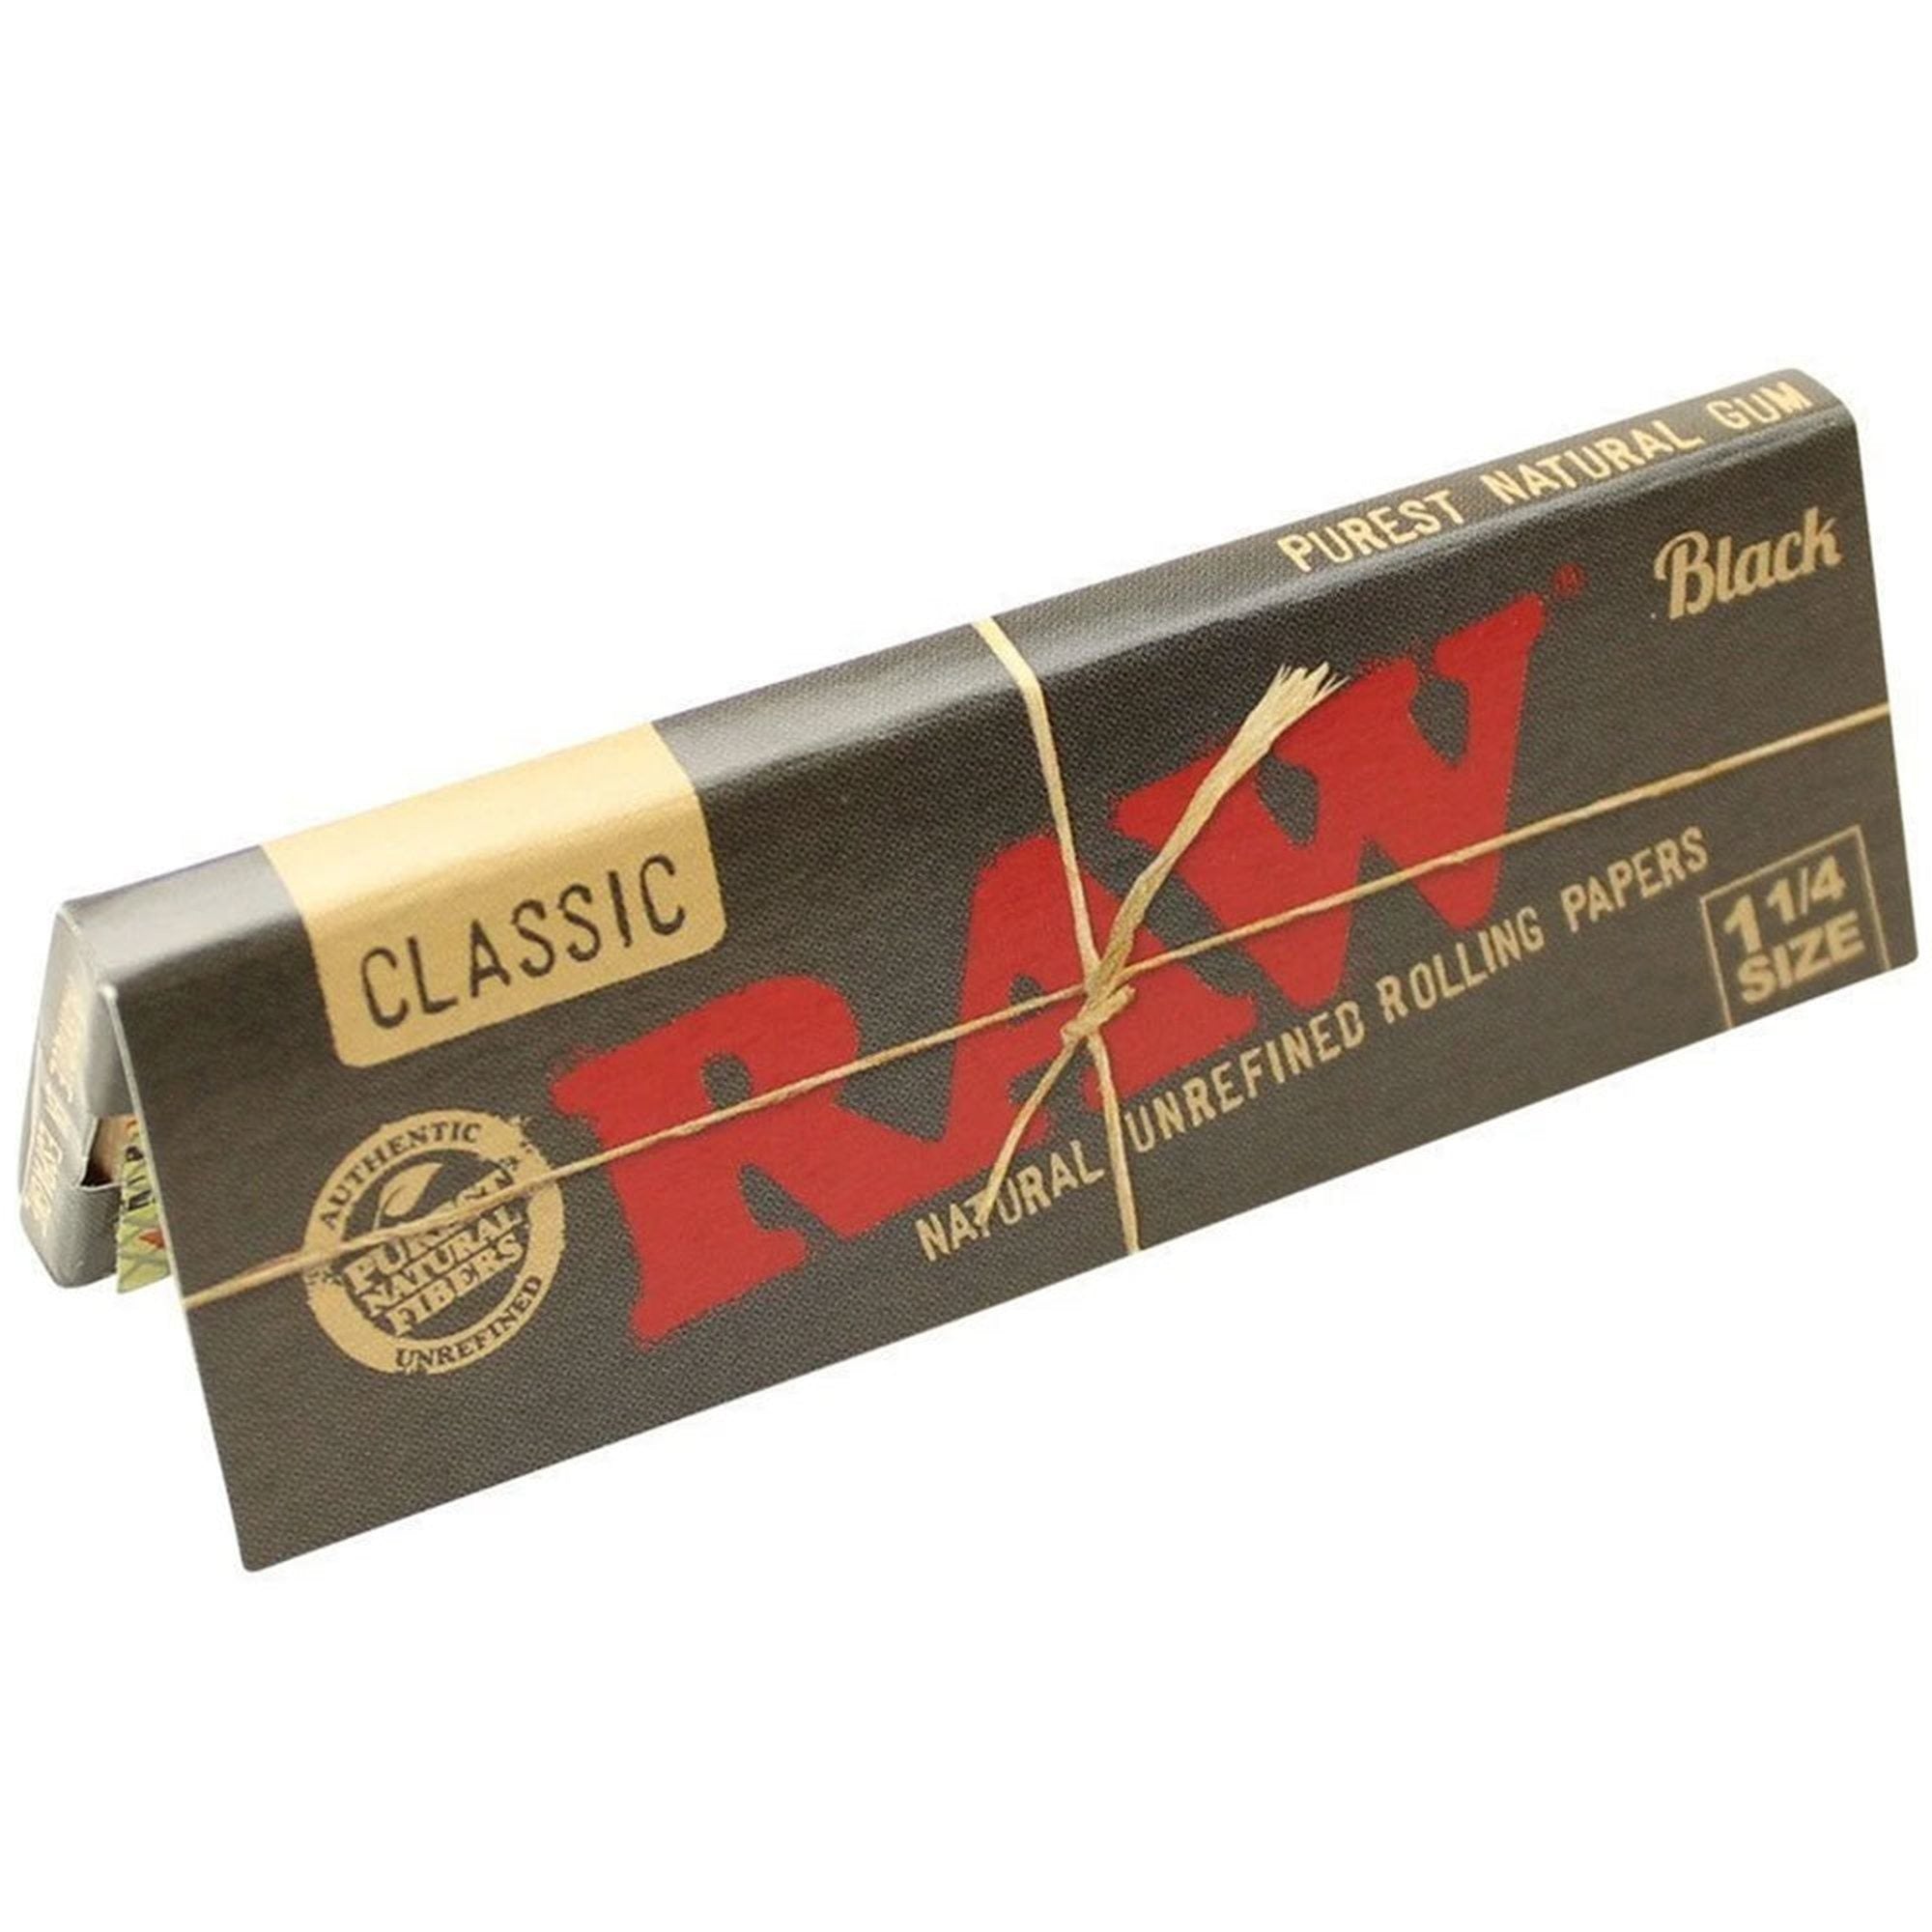 Raw Black 1.25 1 1/4 Size Rolling Papers Full - Box of 24 Pack - Smoker's World of Hollywood